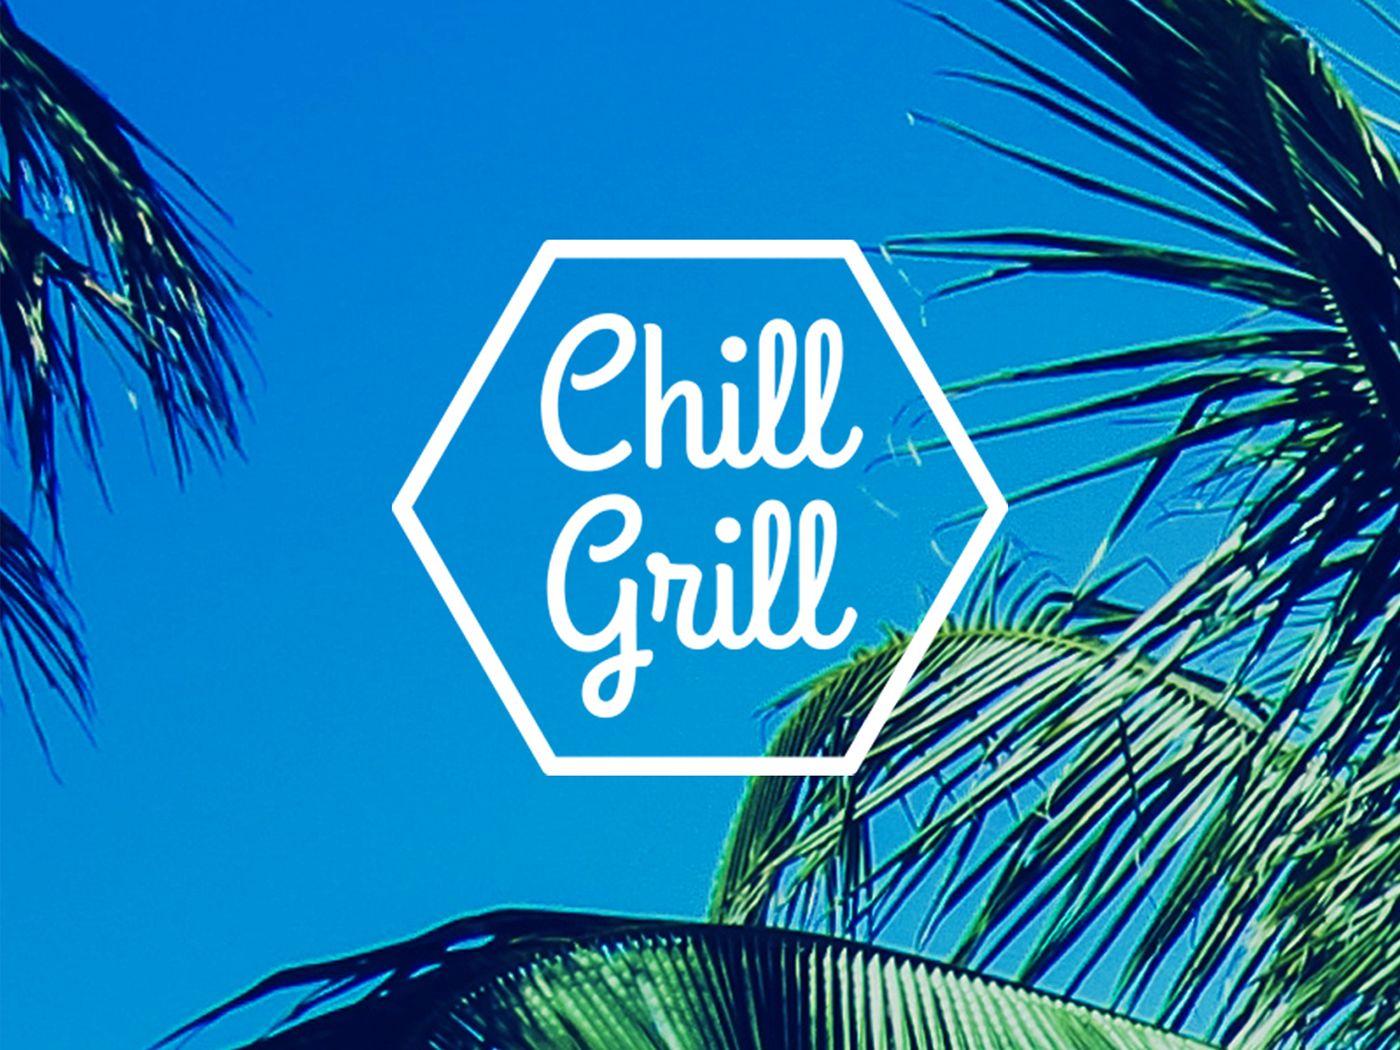 Chill and Grill Logo - Chill Grill - logo & prints on Behance